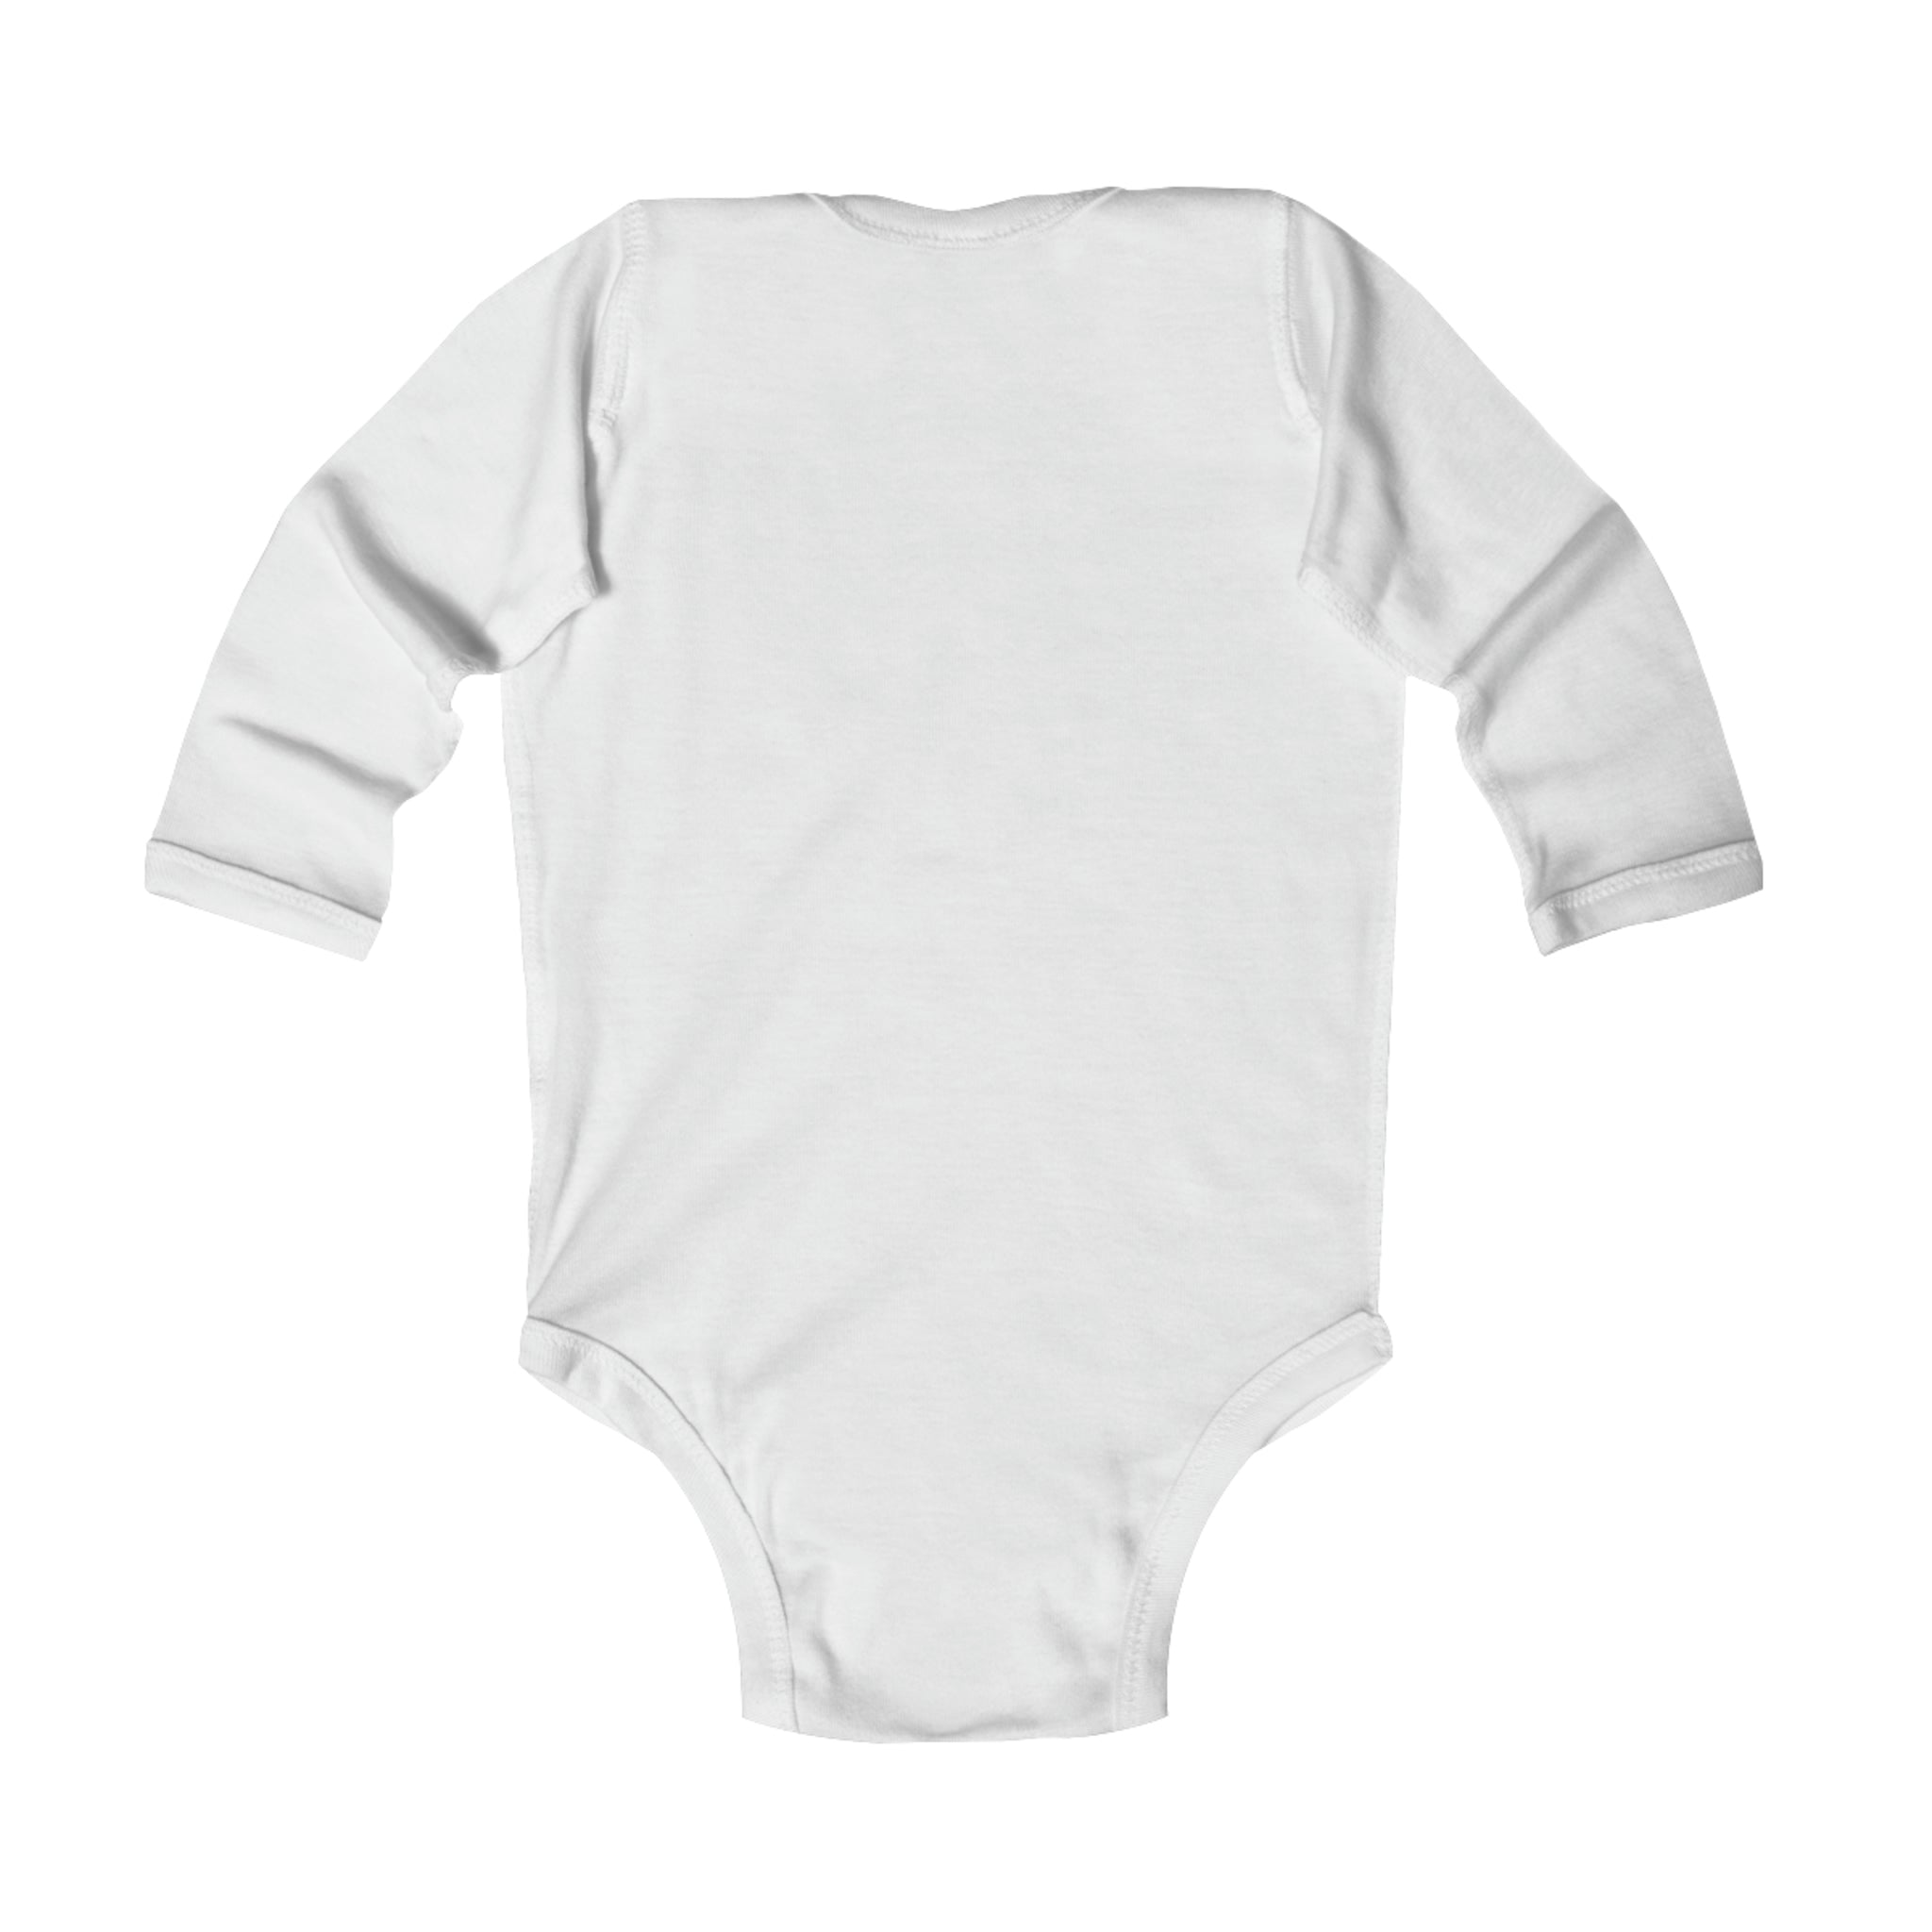 Happy 4th of July American Flags design Long Sleeve Baby Bodysuit